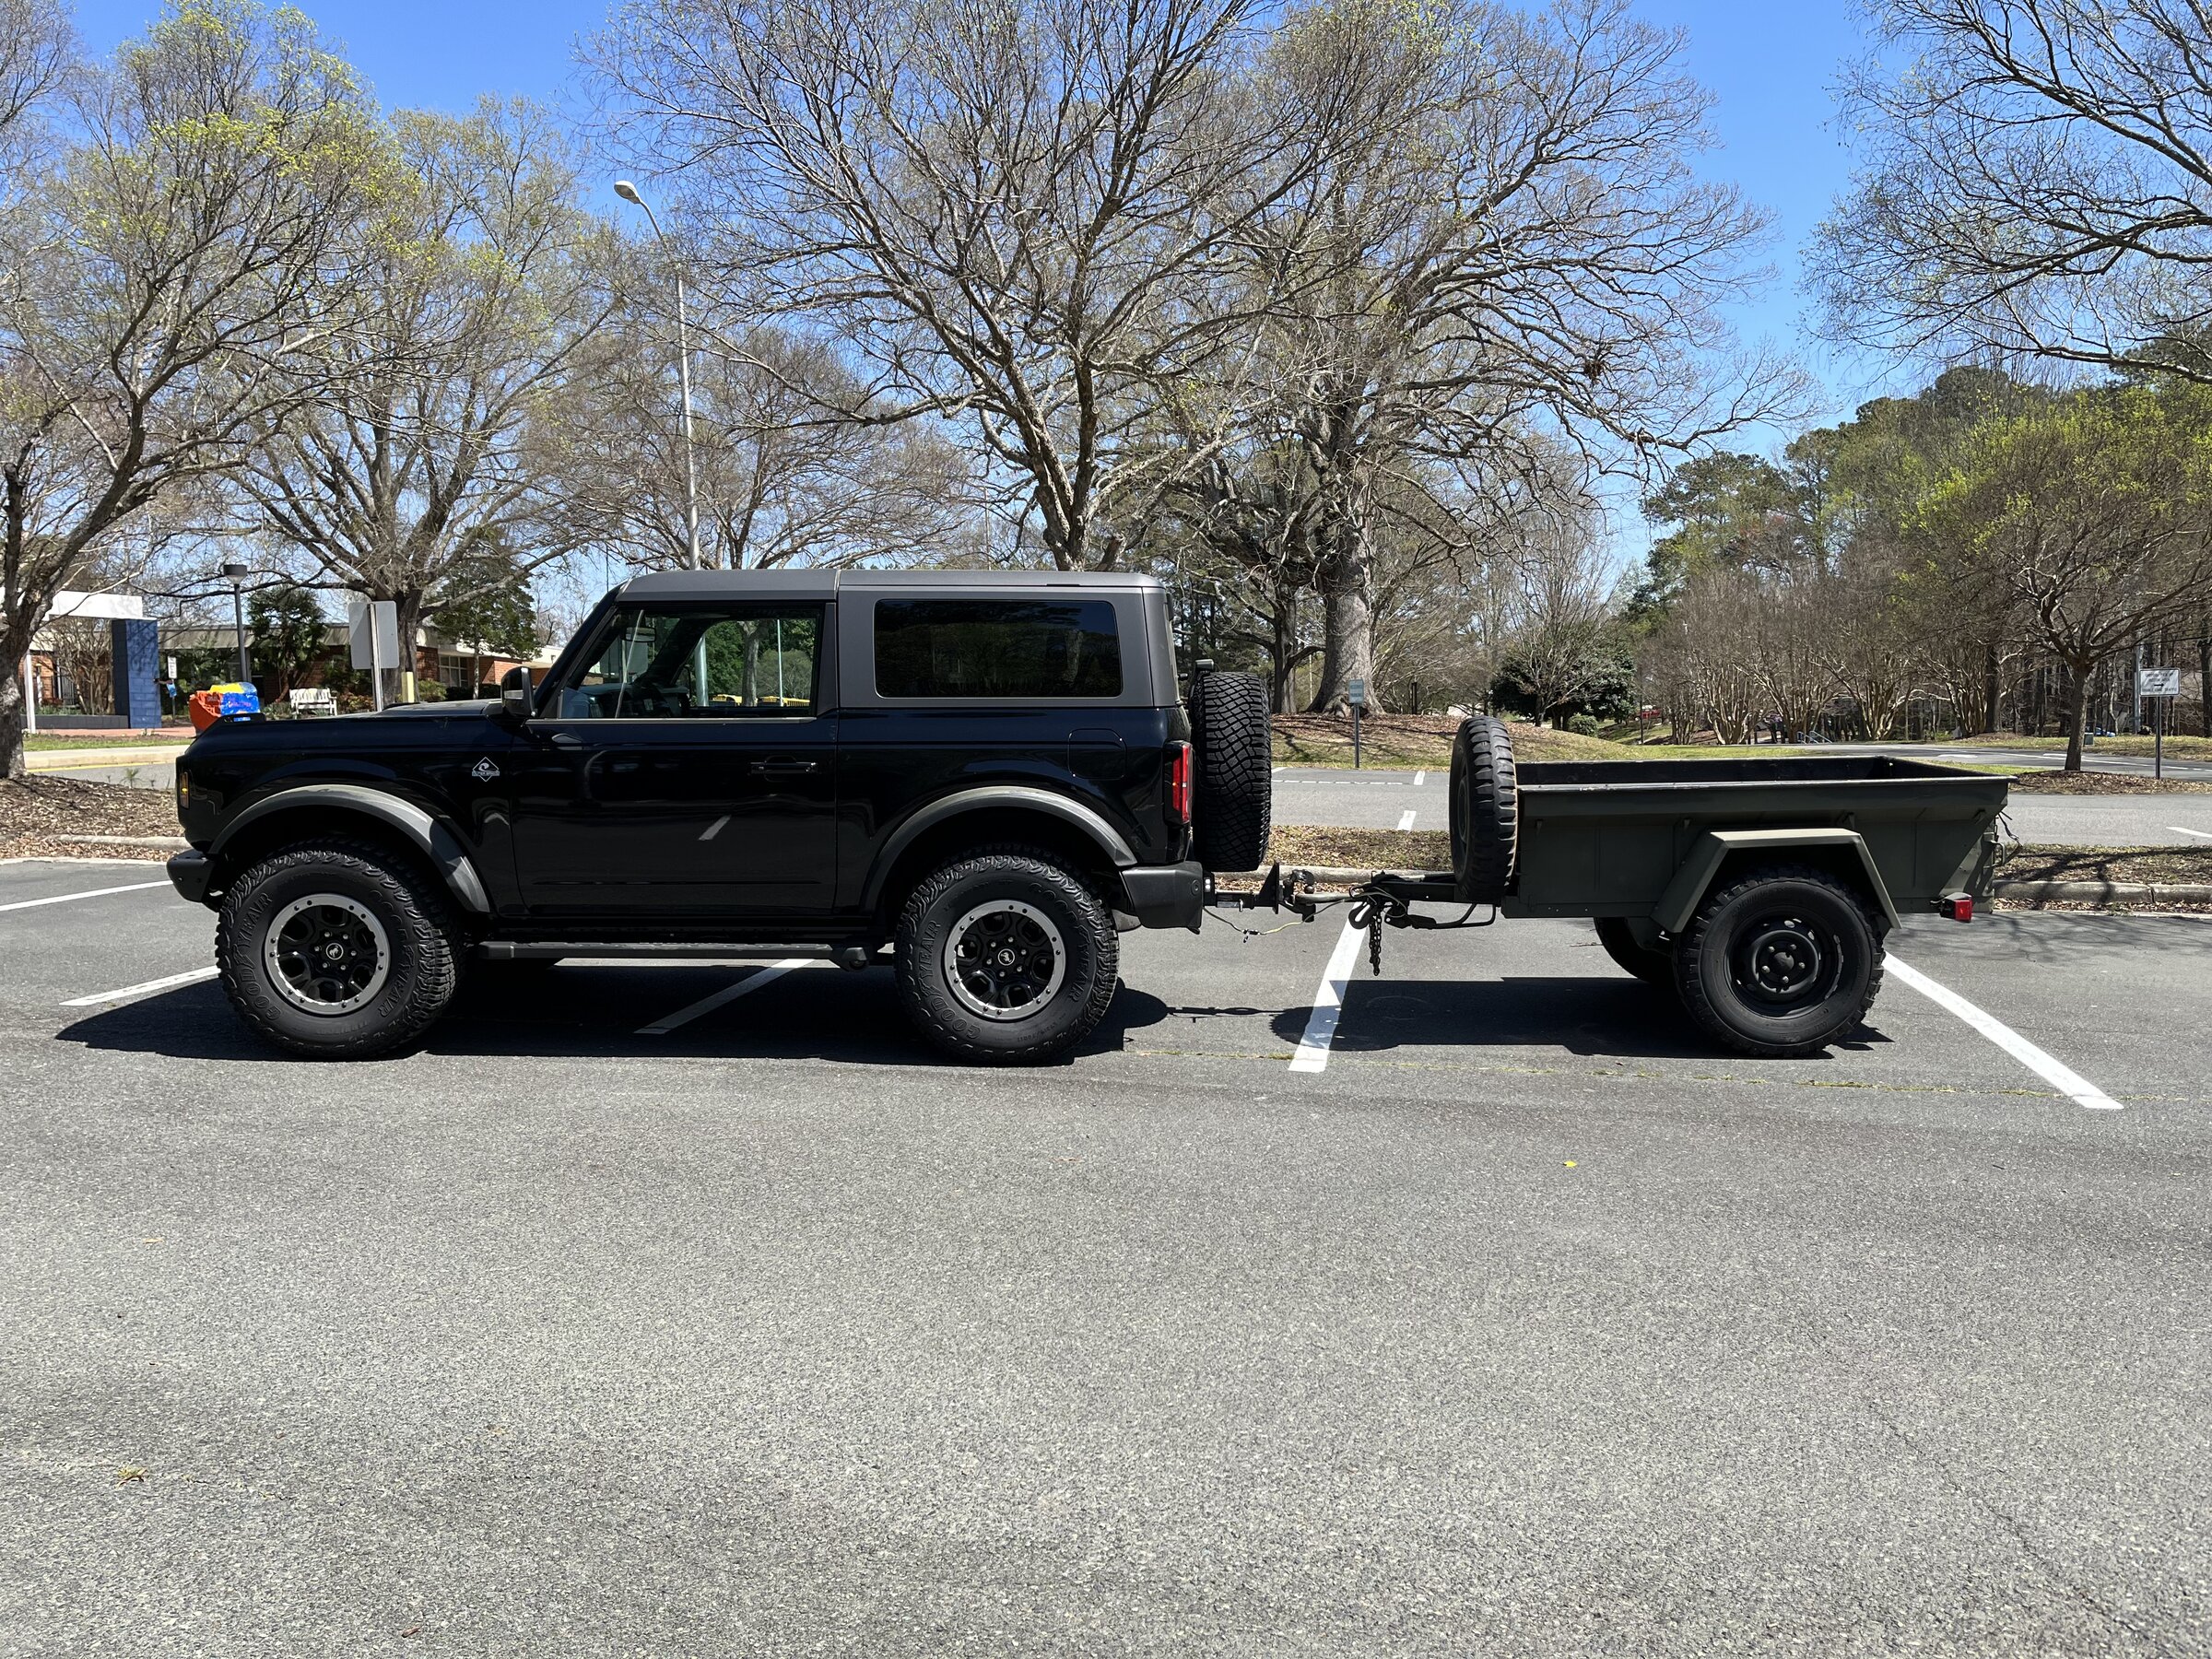 Ford Bronco Broncos Pulling Trailers Pics - Add Yours 20220625_105520